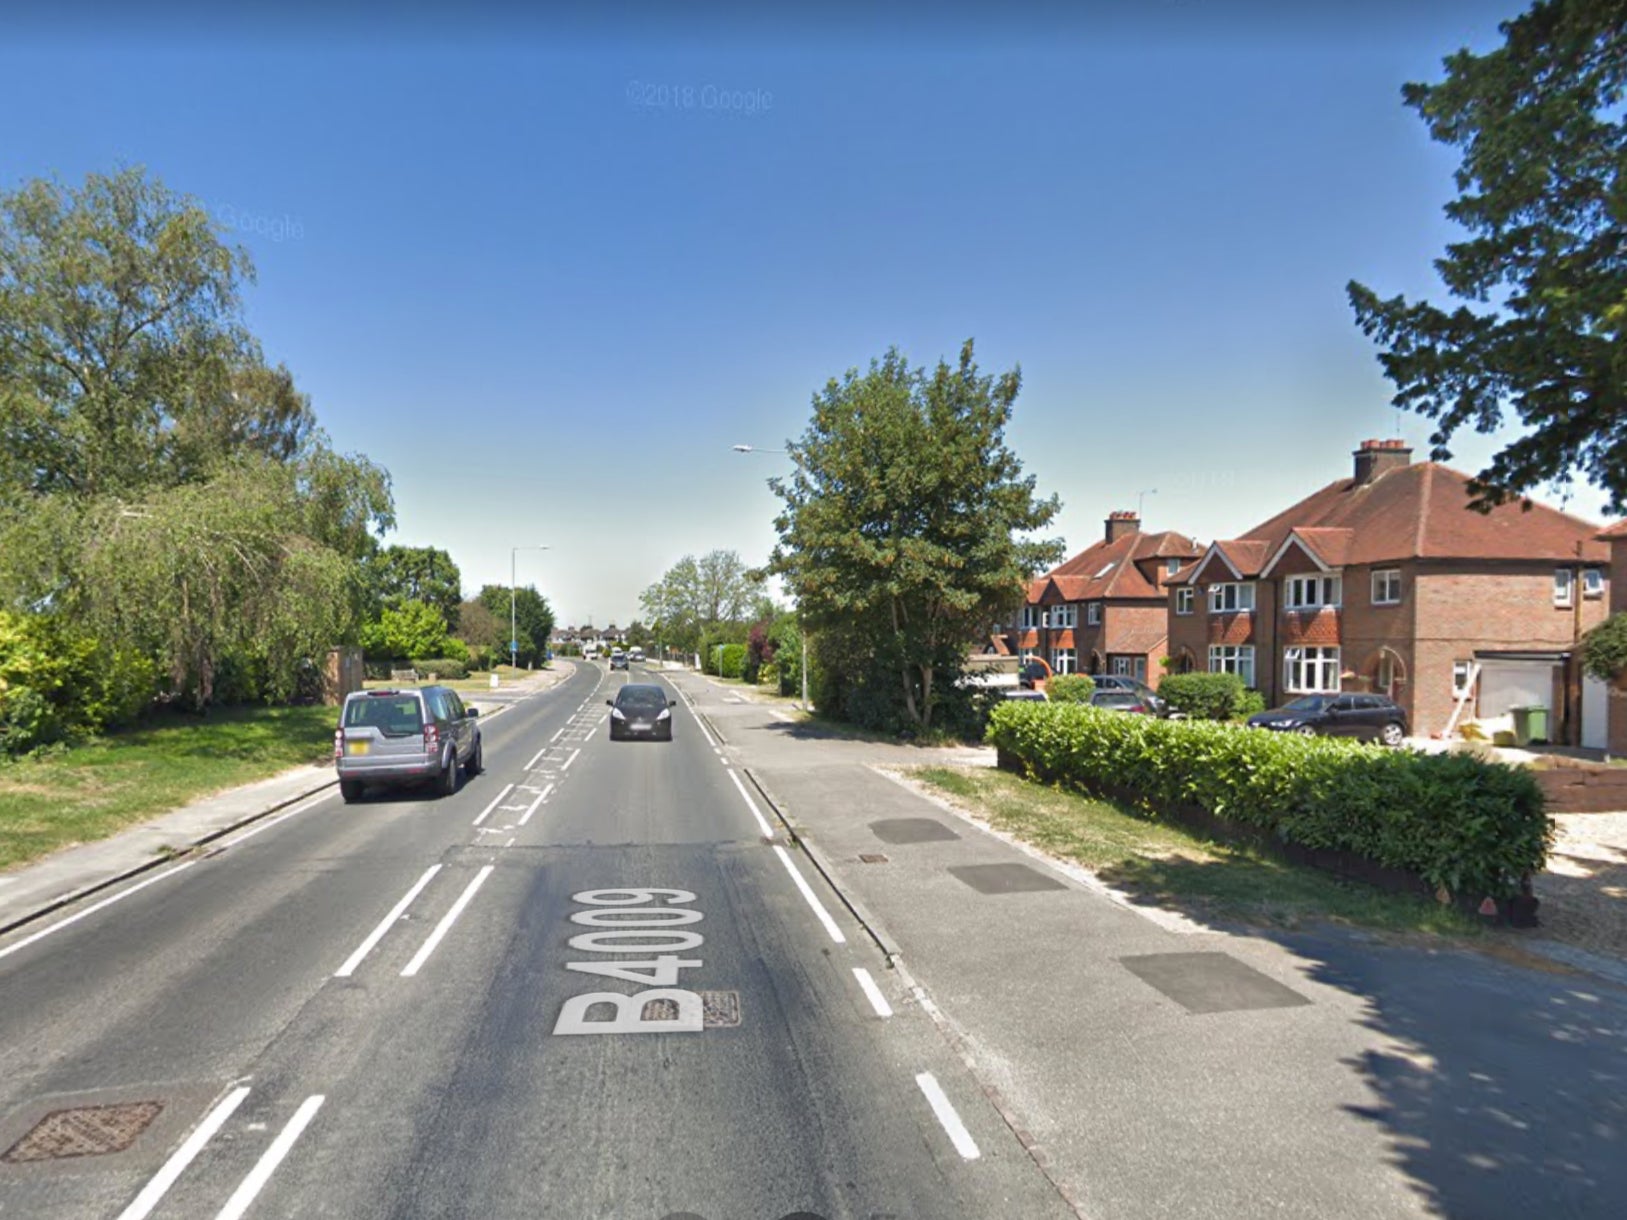 A Google Maps image of Aylesbury Road, Wendover.